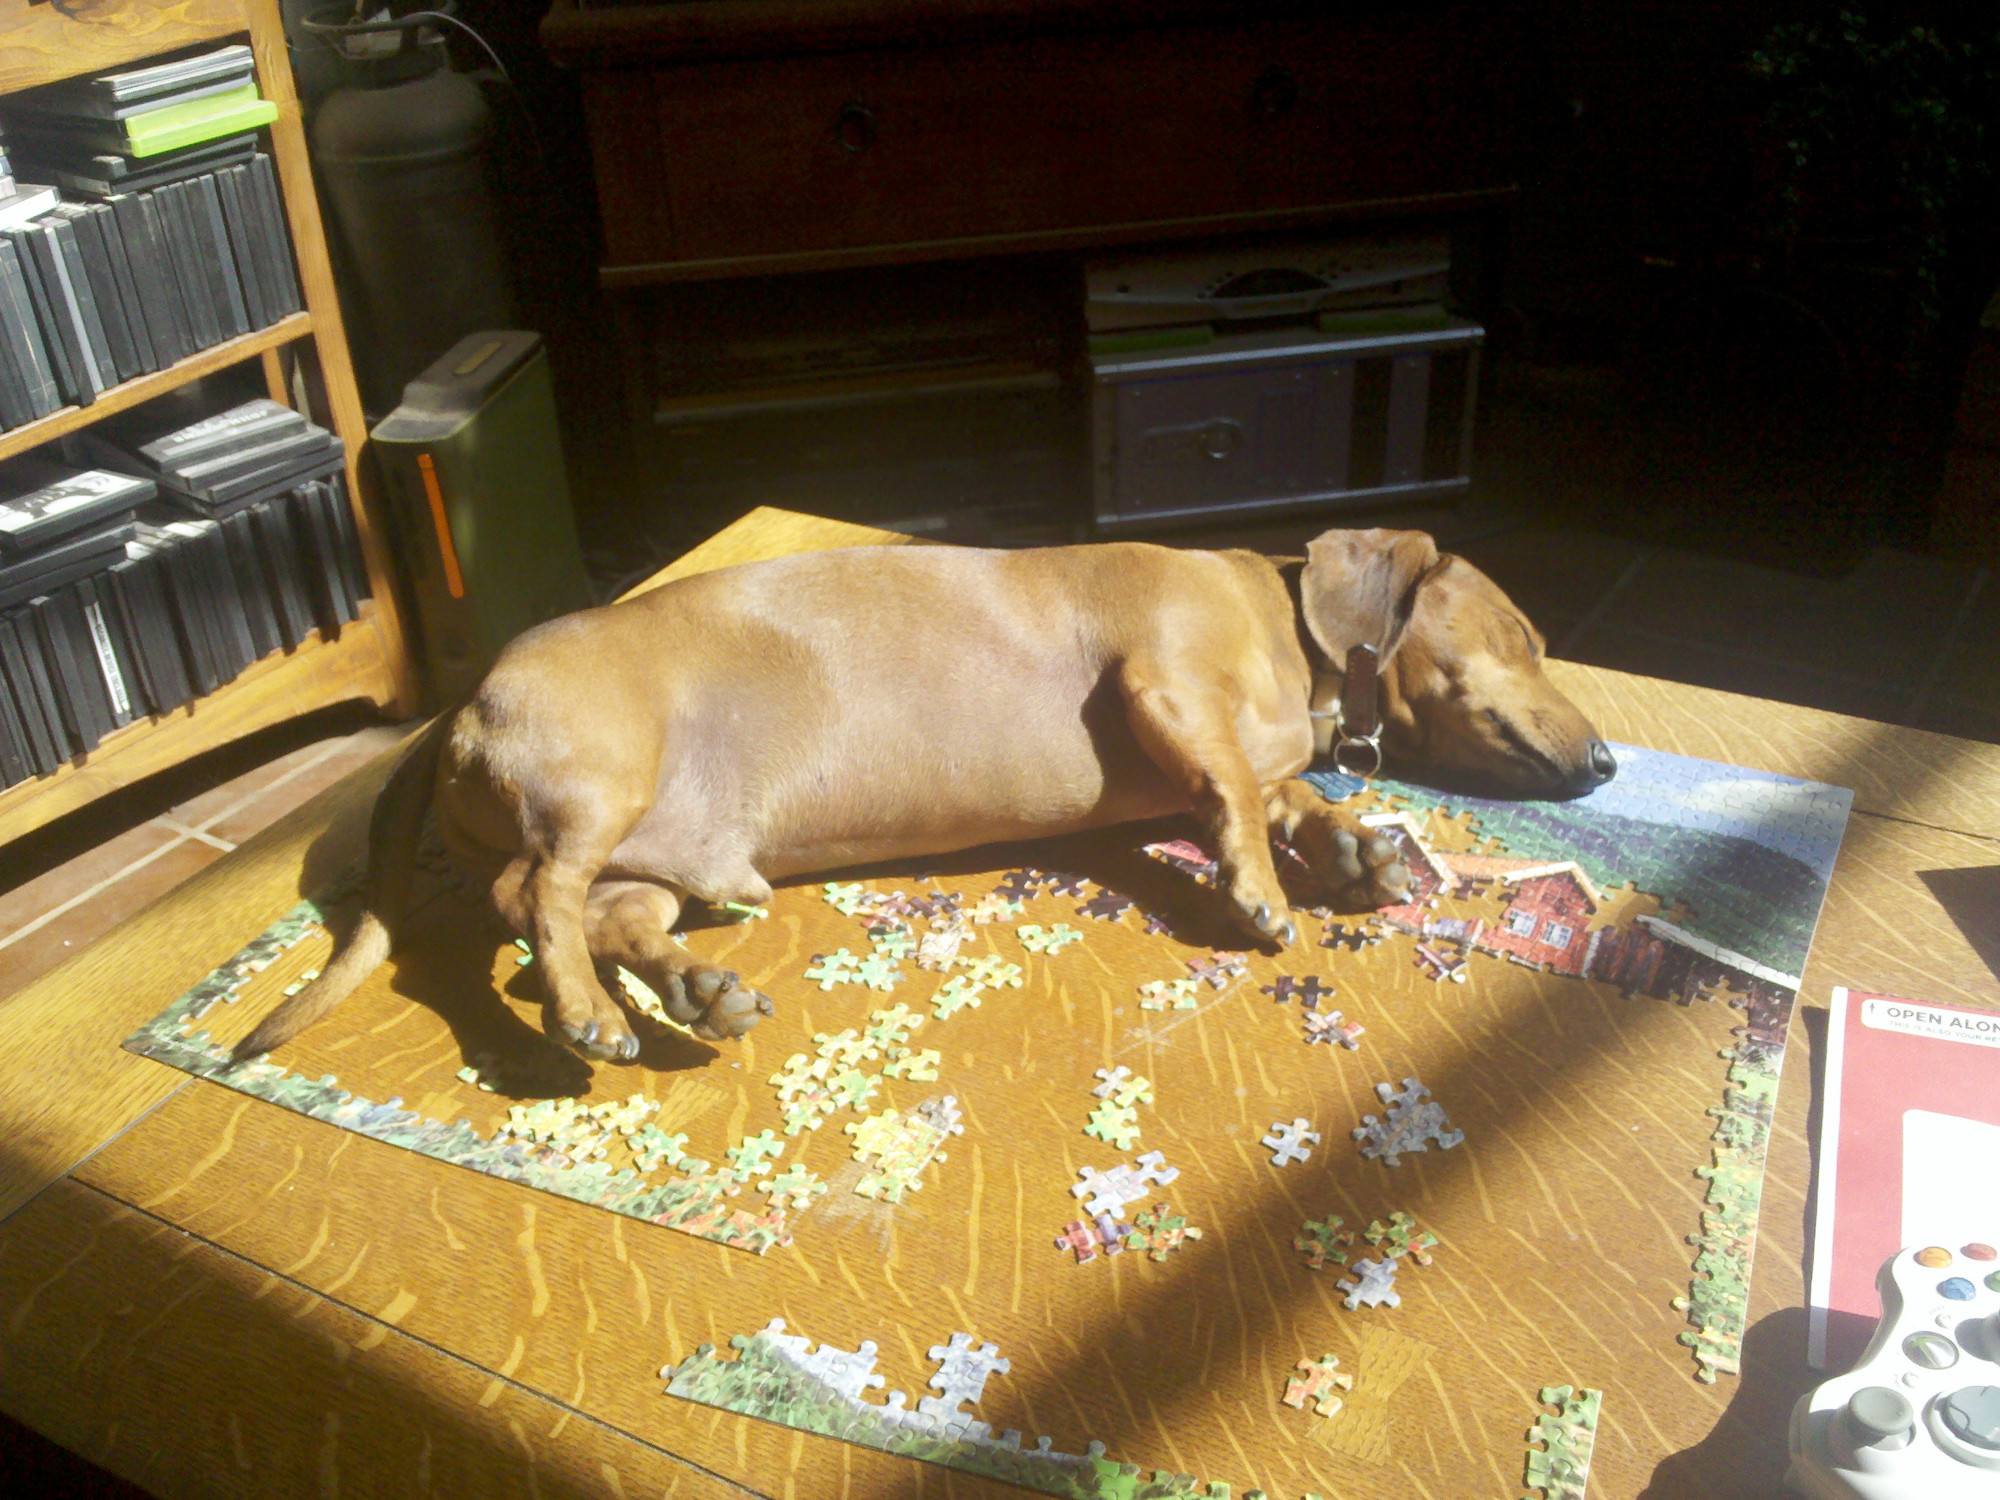 A dachshund sleeping on a puzzle on a coffee table